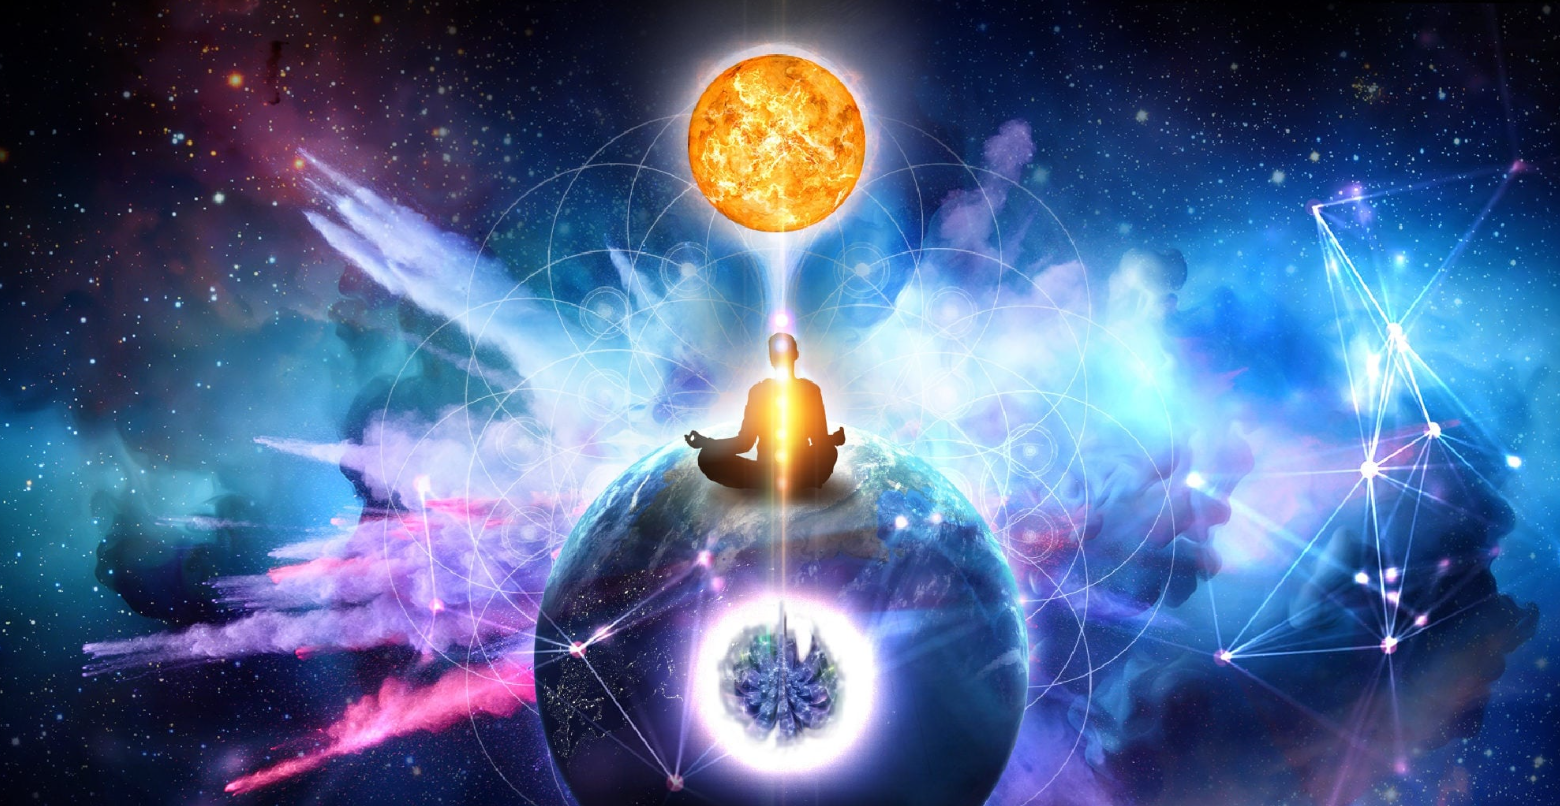 Mystical Universe with CHIOS orange red ball meditation and Reiki energy swirling among the spiritual cosmos